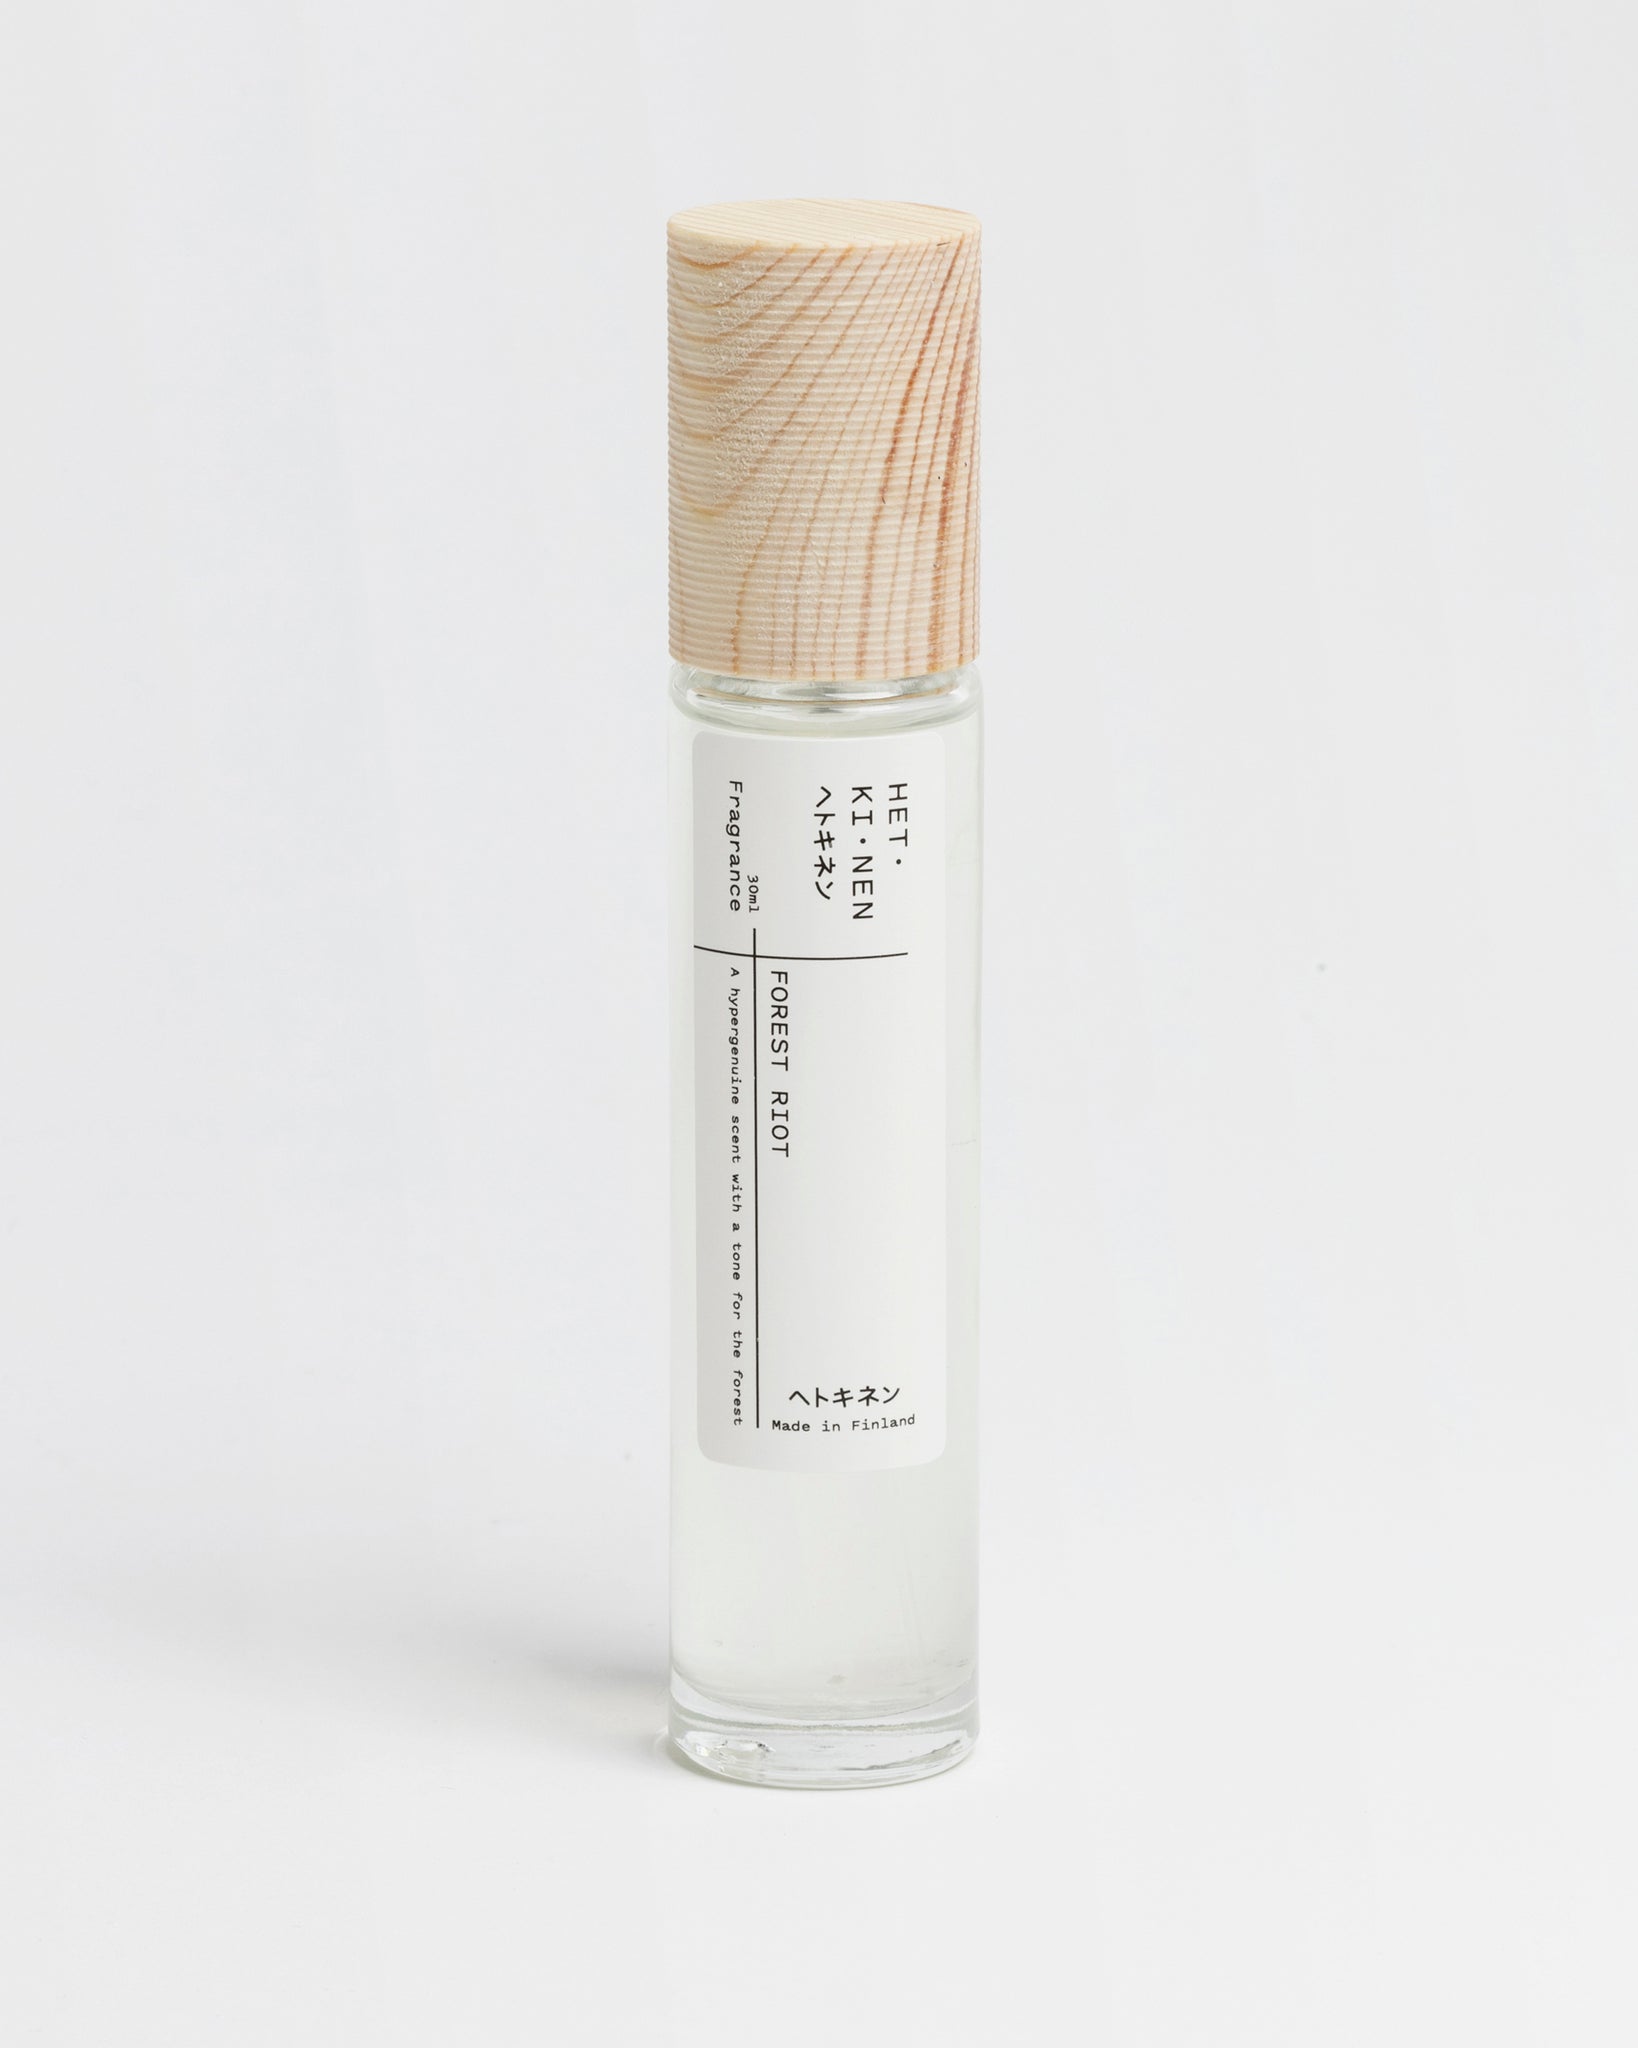 Forest Riot Personal Fragrance